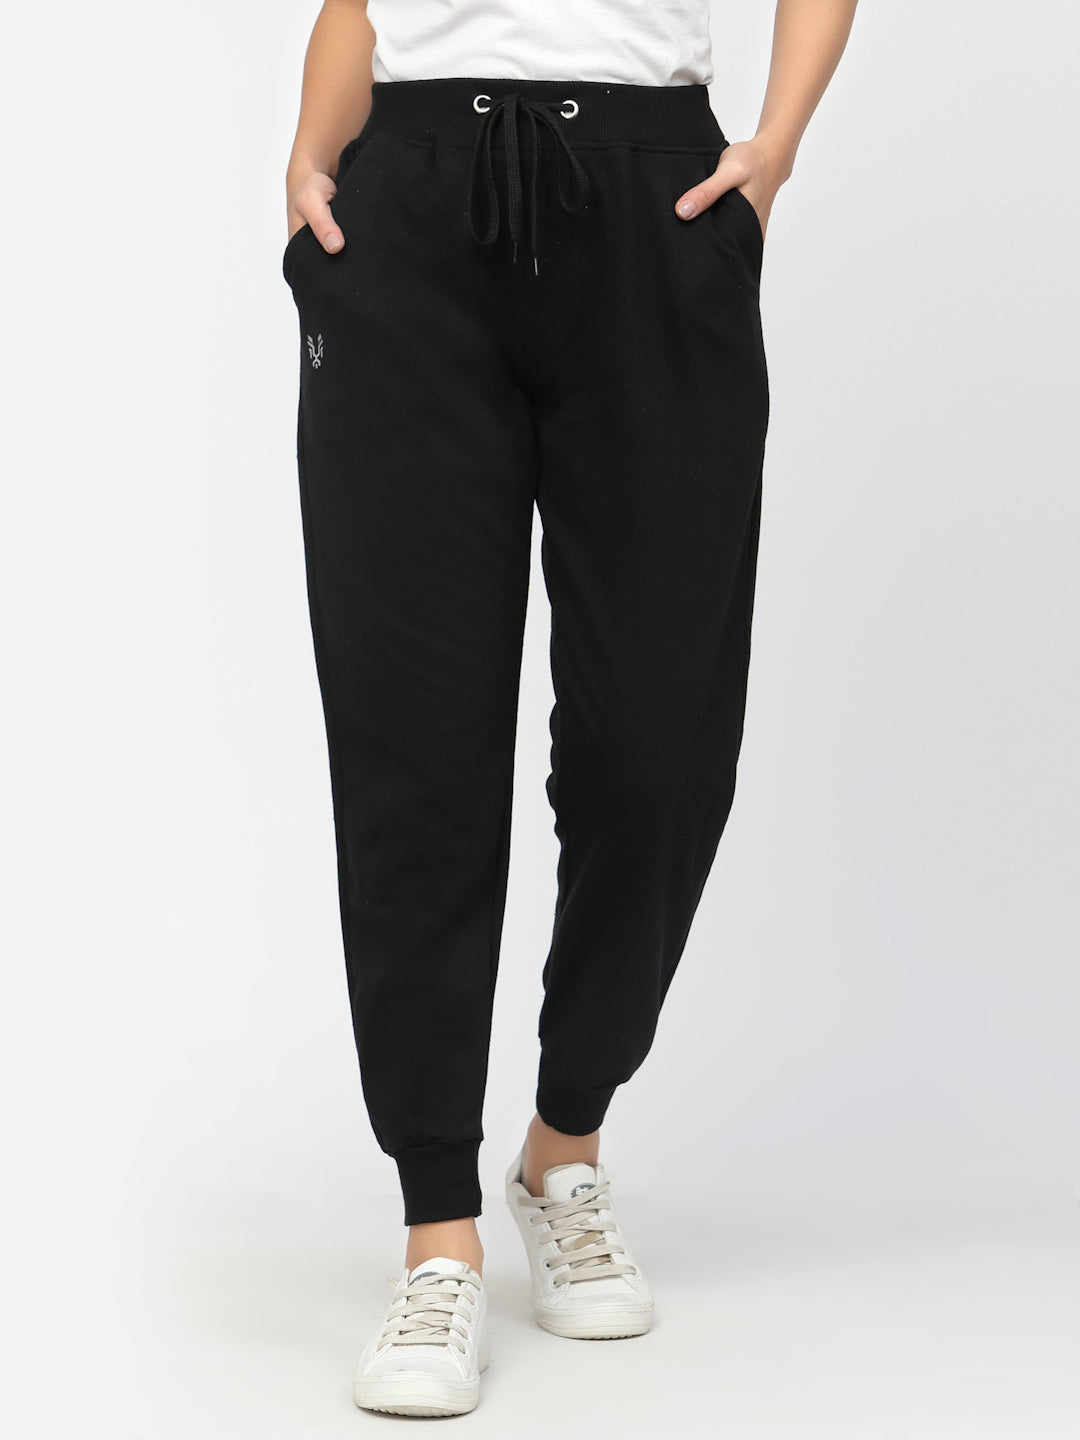 Black Joggers For Women